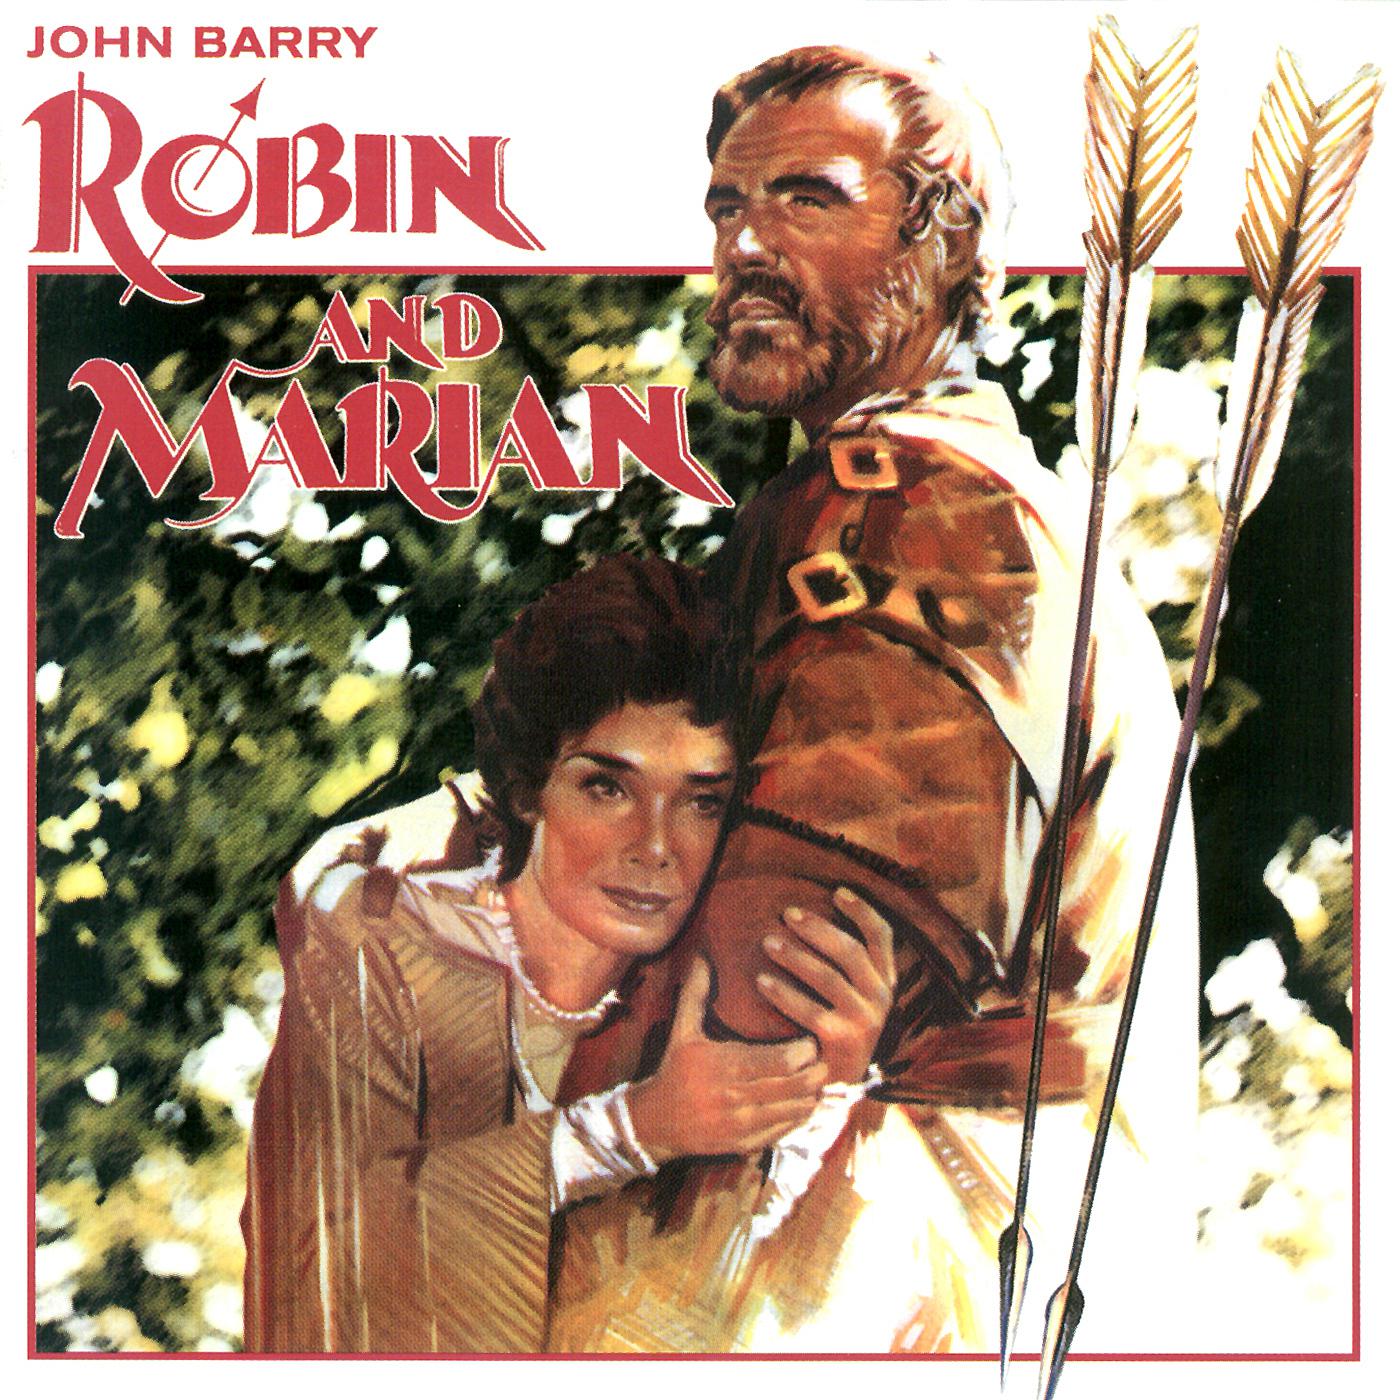 The Ride to Sherwood / The Ride to Nottingham (From "Robin and Marian") [Film Version]